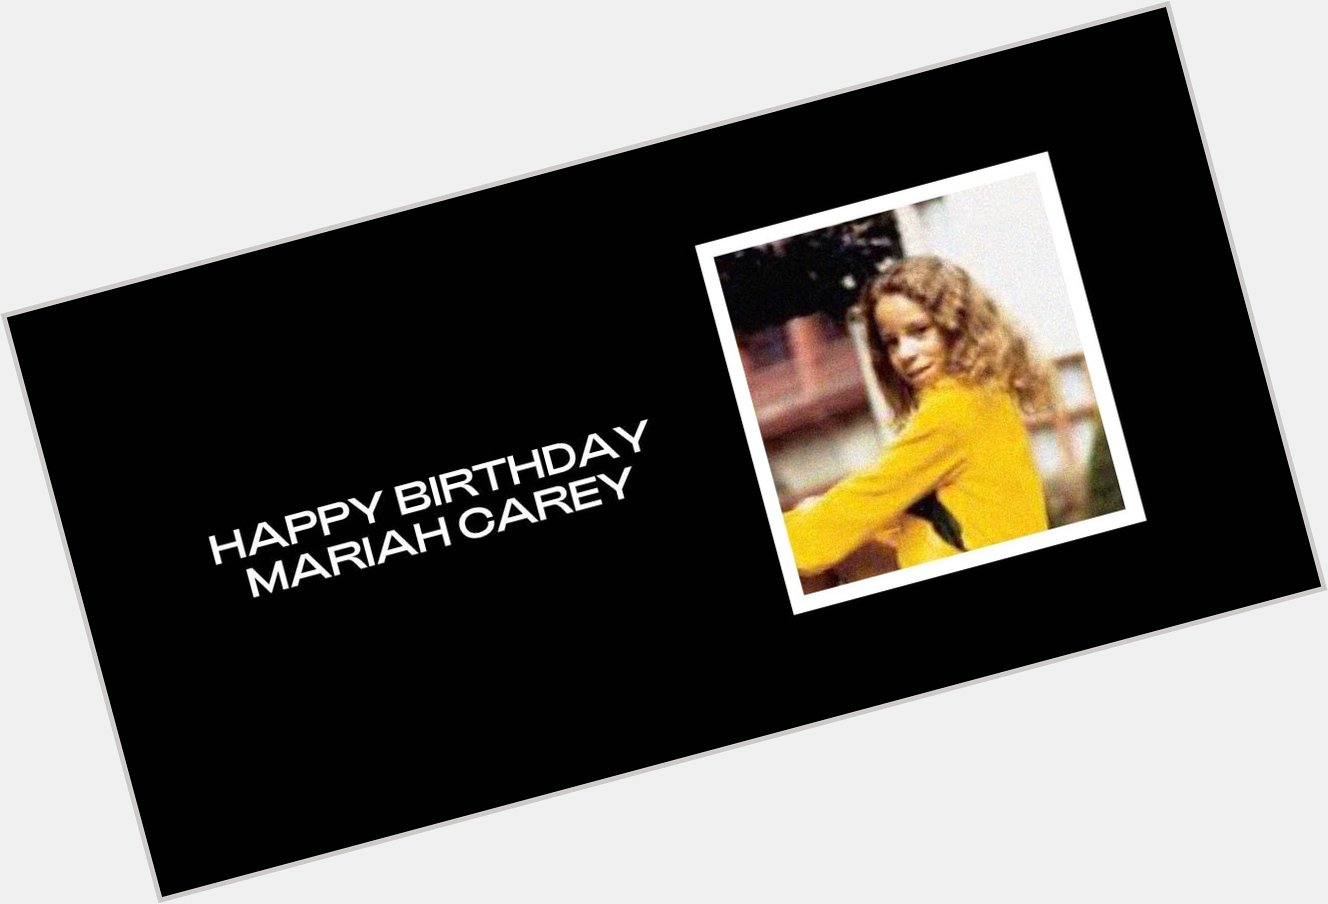 Beyoncé wishes Mariah Carey a happy birthday on her website. 